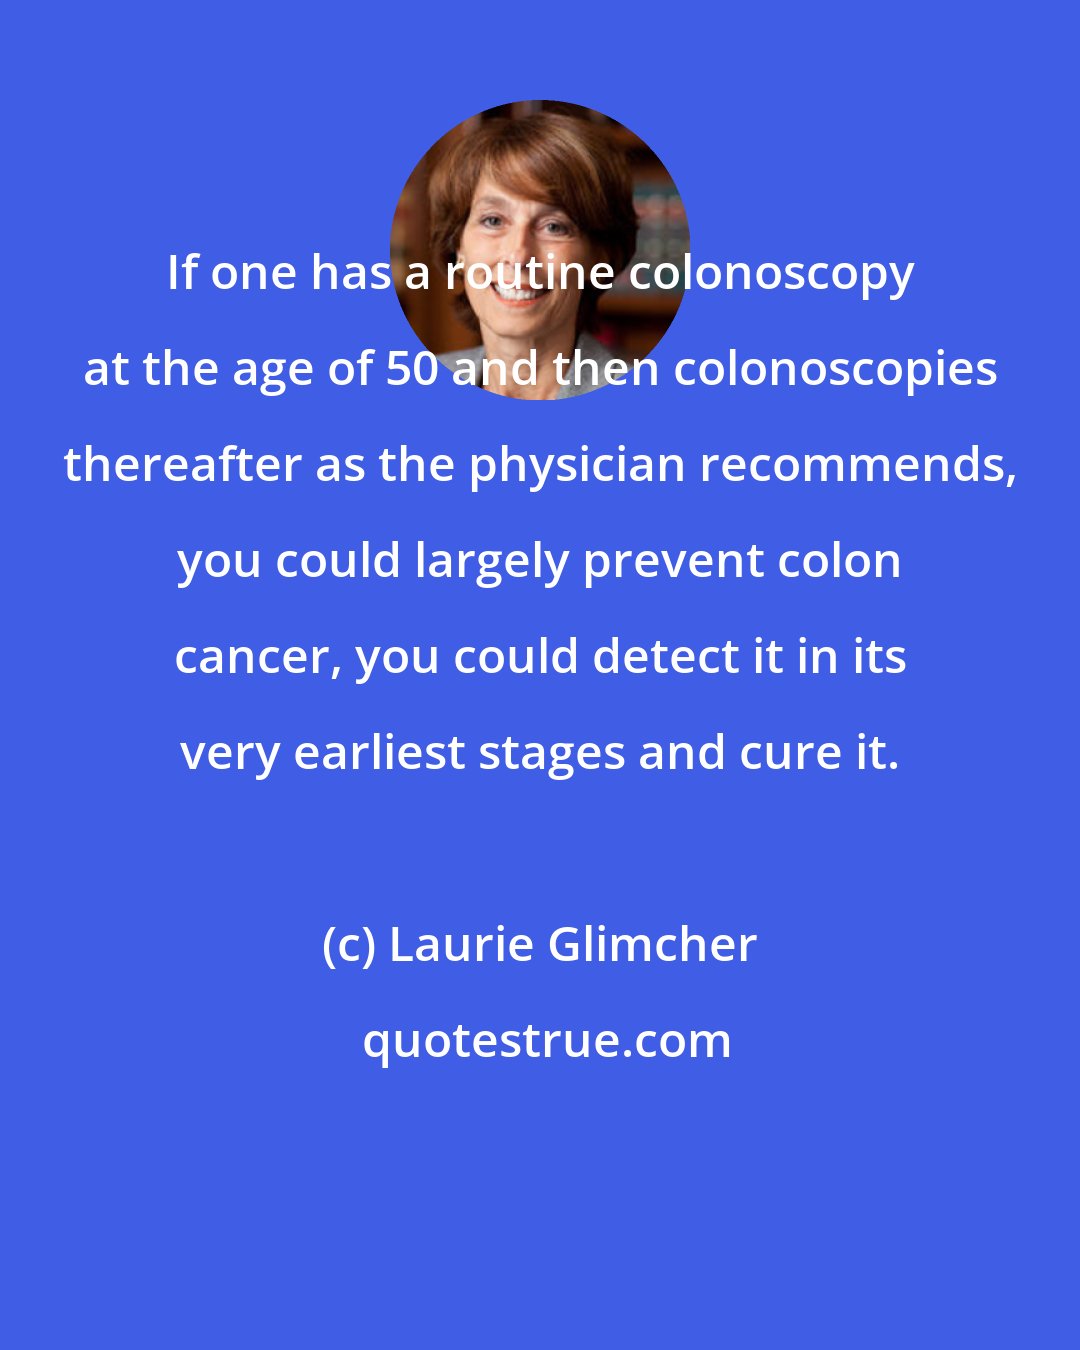 Laurie Glimcher: If one has a routine colonoscopy at the age of 50 and then colonoscopies thereafter as the physician recommends, you could largely prevent colon cancer, you could detect it in its very earliest stages and cure it.